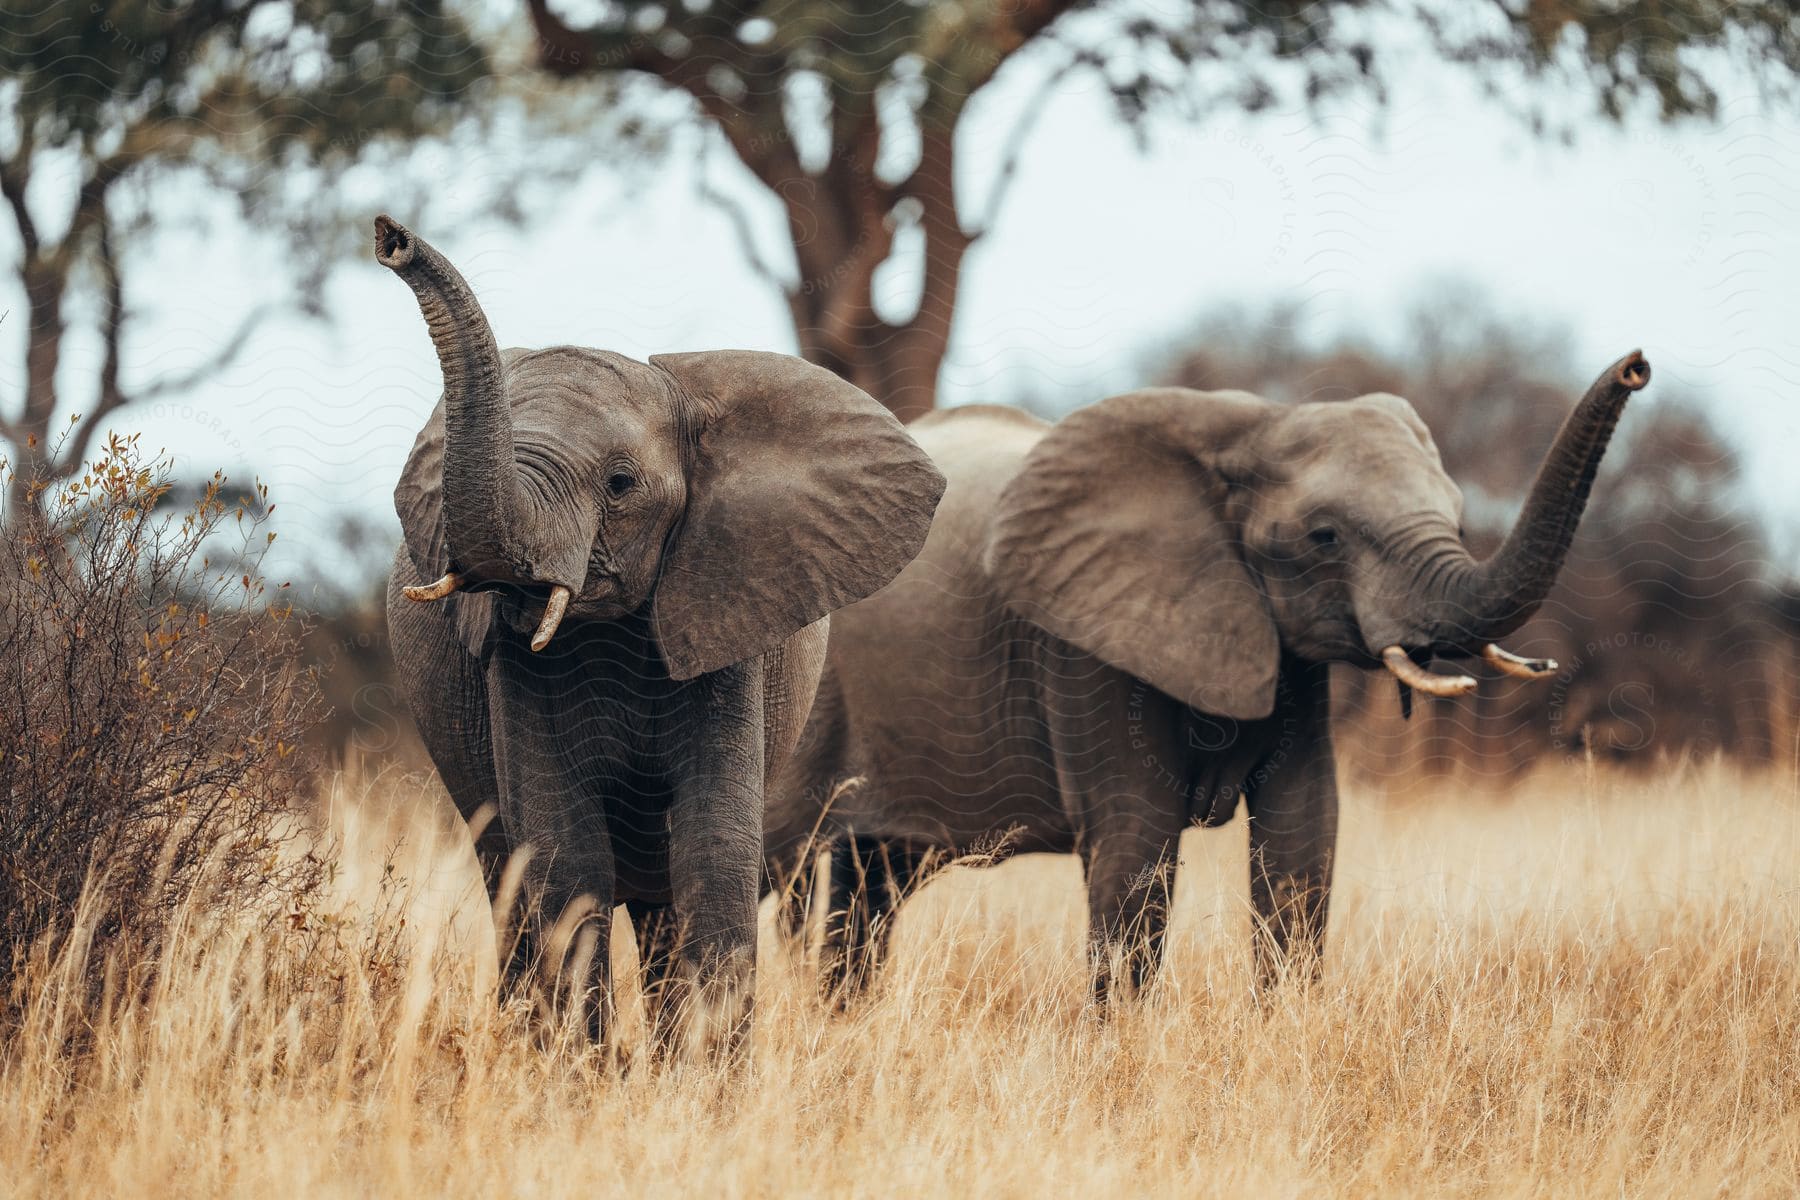 Two elephants standing in a field of tall dry grass near trees with their trunks in the air